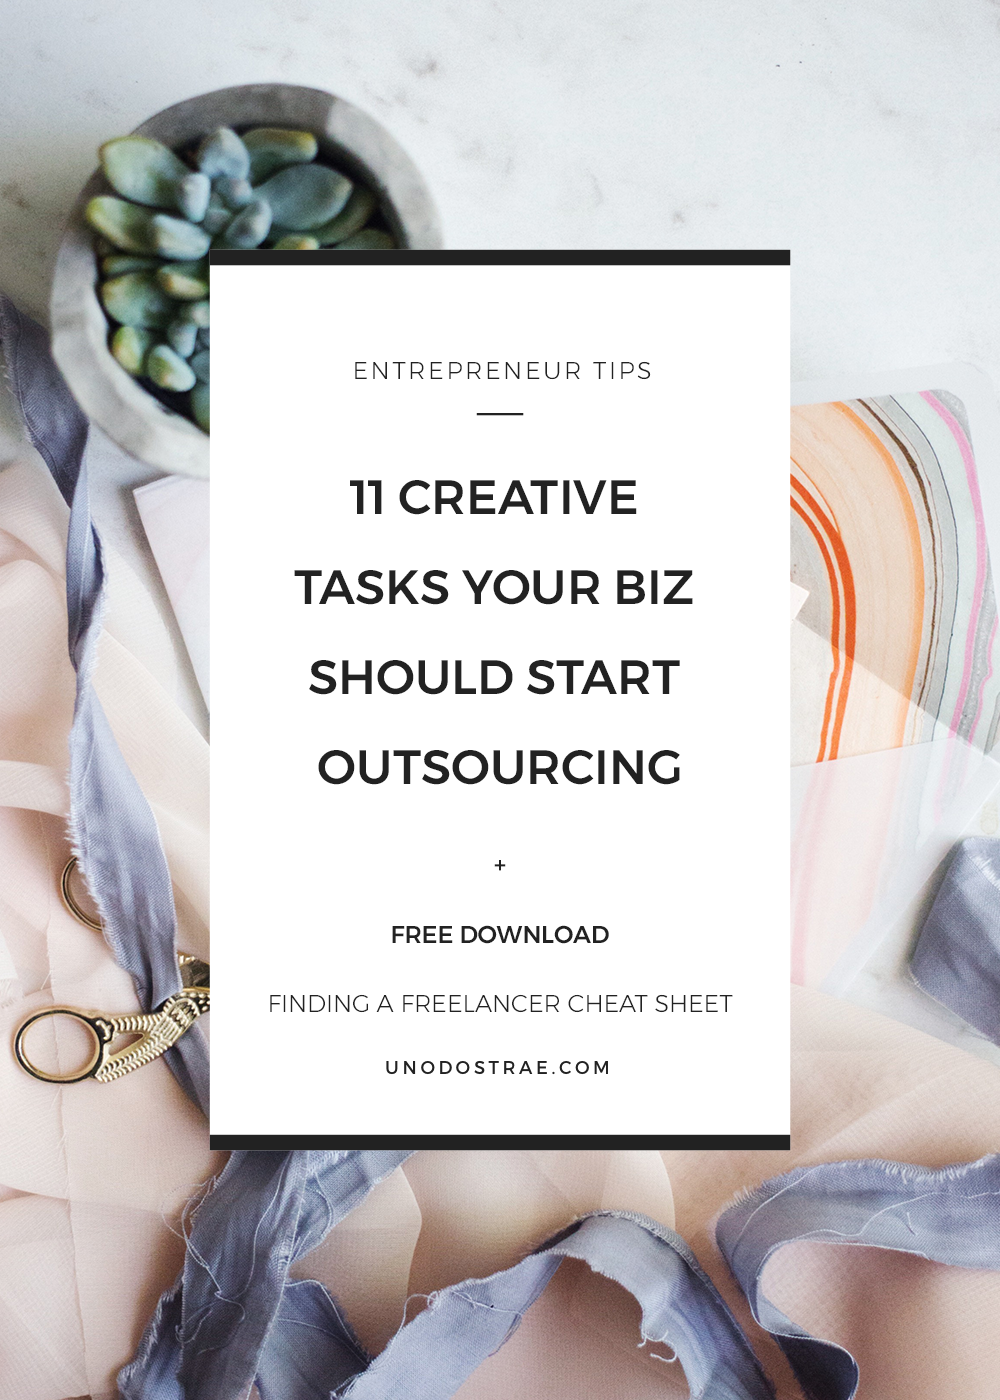 With your small biz, outsourcing should never be a dirty word. Learn which creative tasks you can start to outsource today. Creative freelancers are an easy way to free up your precious time.